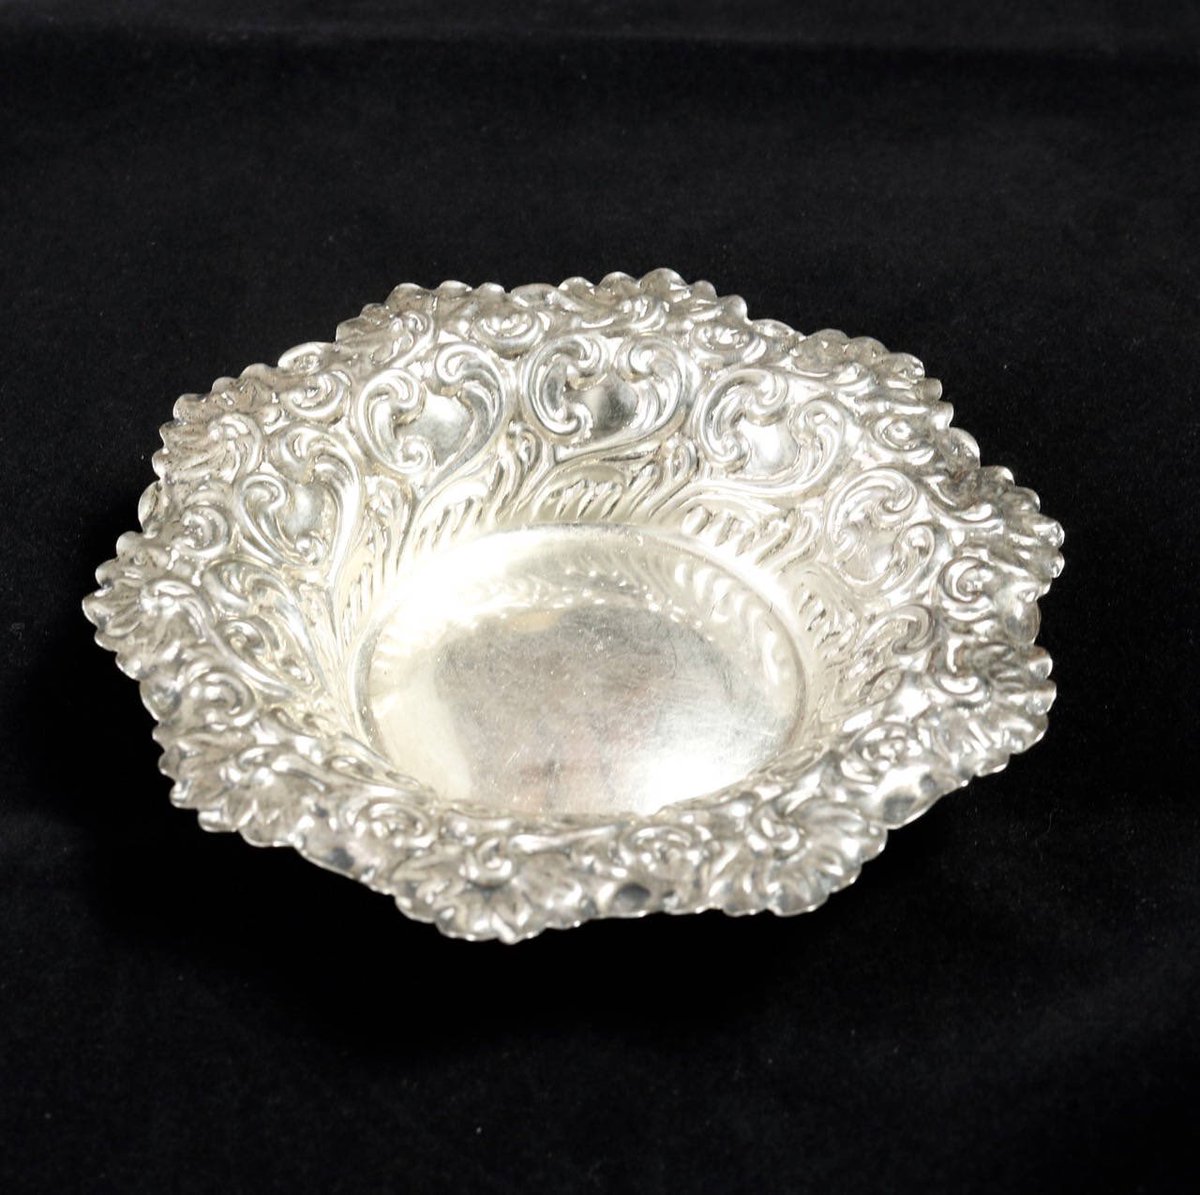 Hand Made Sterling Vintage Antique American Bowl George W. Shiebler & Co 1890 #bowl #silver #anniversary #christmasgift #homedecor #tabledecor #thanksgiving 
#antiquebowl  #shiebler #antiquesilver etsy.me/2DjTsIU #antiquesilver #victorian  etsy.me/33su7WA